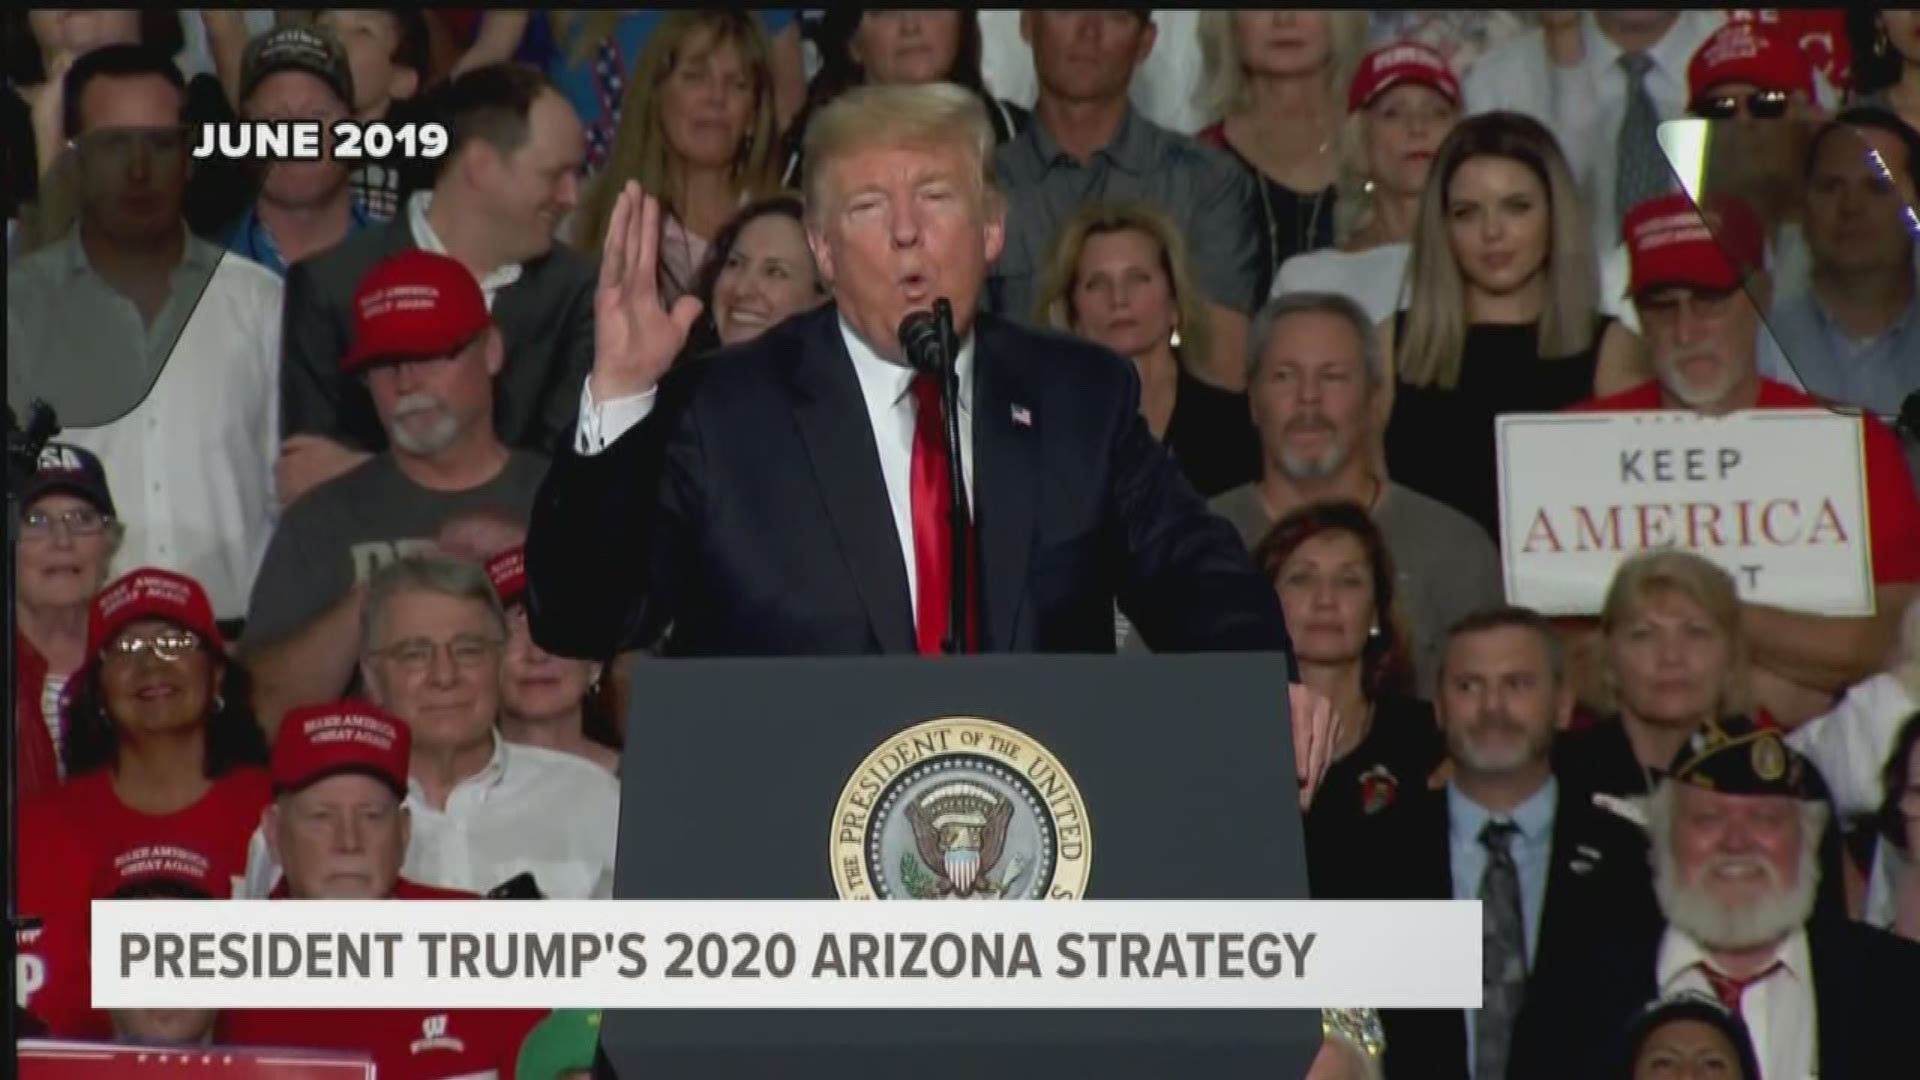 The Trump campaign's director of strategic communications explains how the president plans to win Arizona, amid signs Republicans are losing their grip on the state.